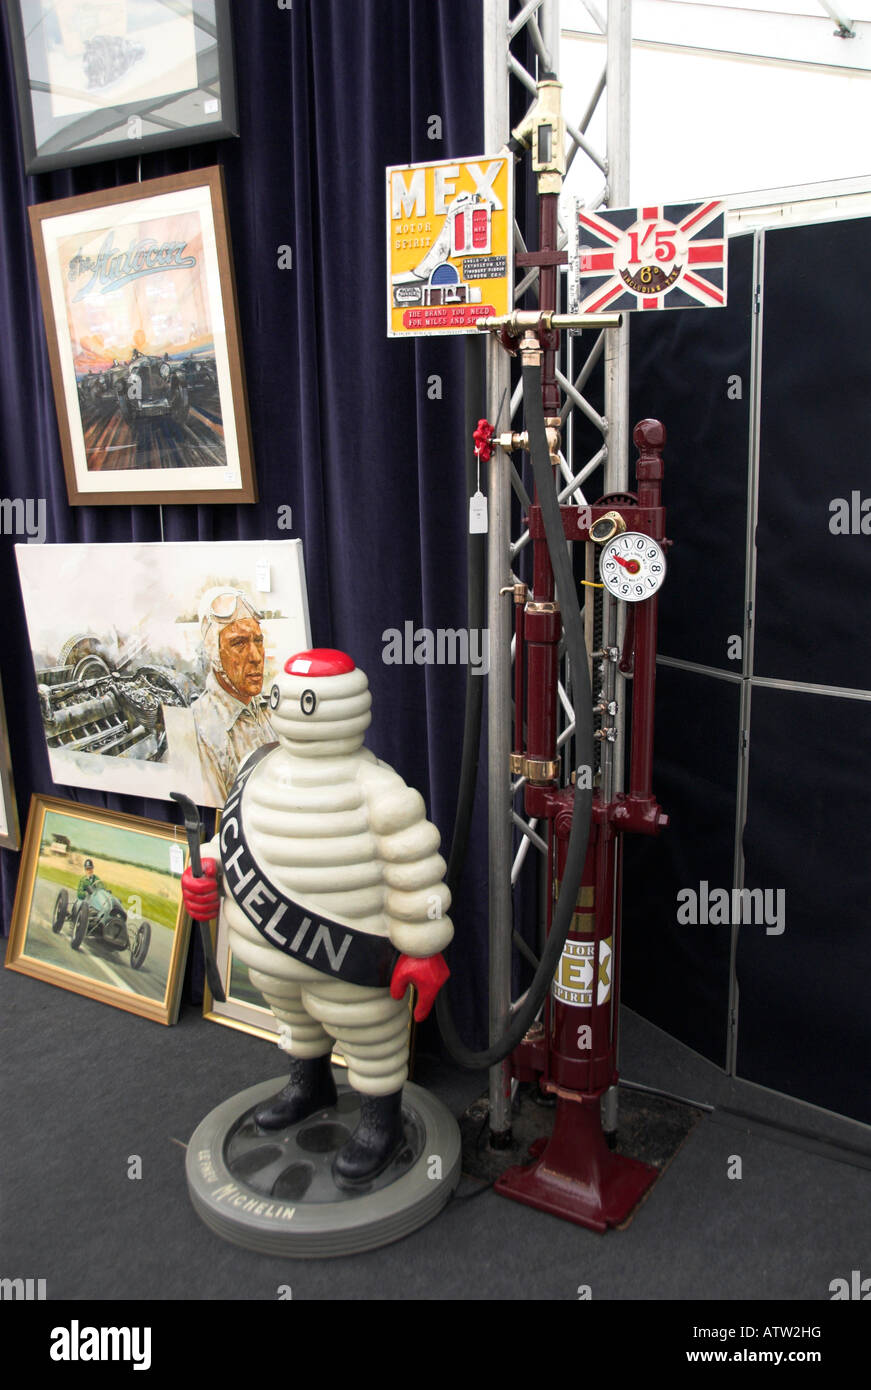 Old Michelin Man Statue and Other Motoring Memorabilia For Sale at the Bonlams Auction Stock Photo